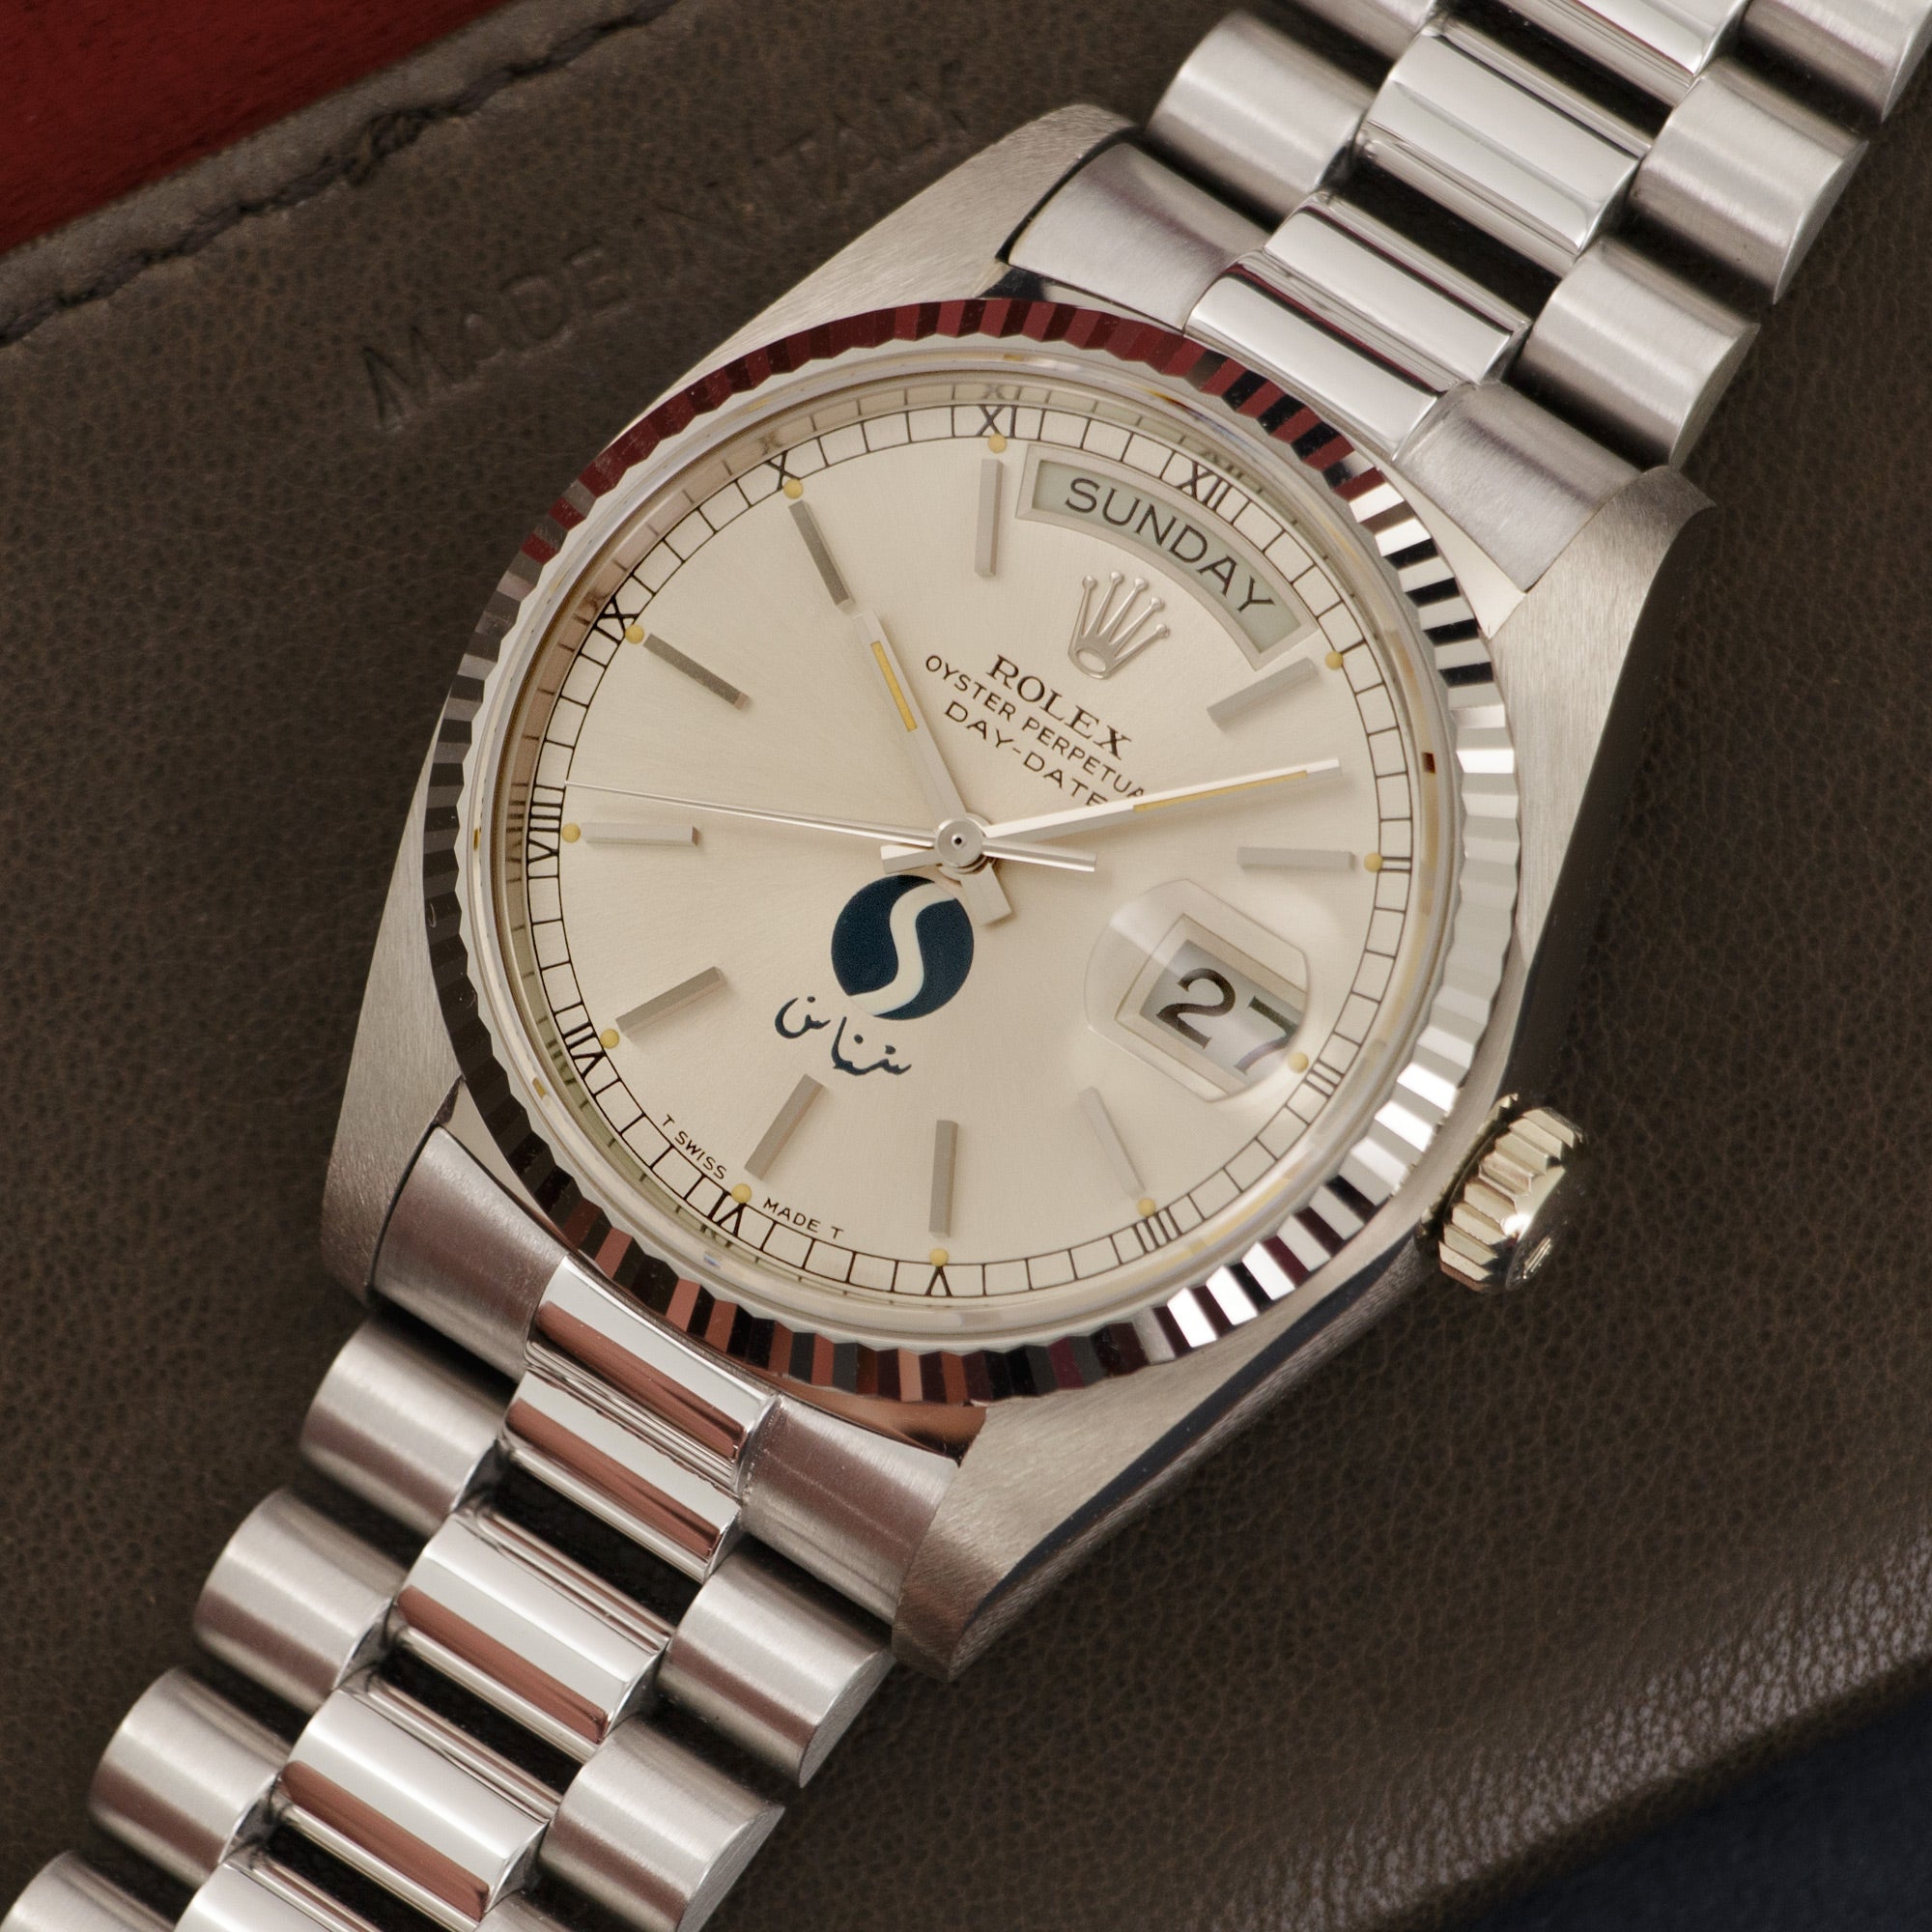 Rolex - Rolex White Gold Day-Date in New Old Stock Condition, Made for Saudi Aviation SNAS - The Keystone Watches